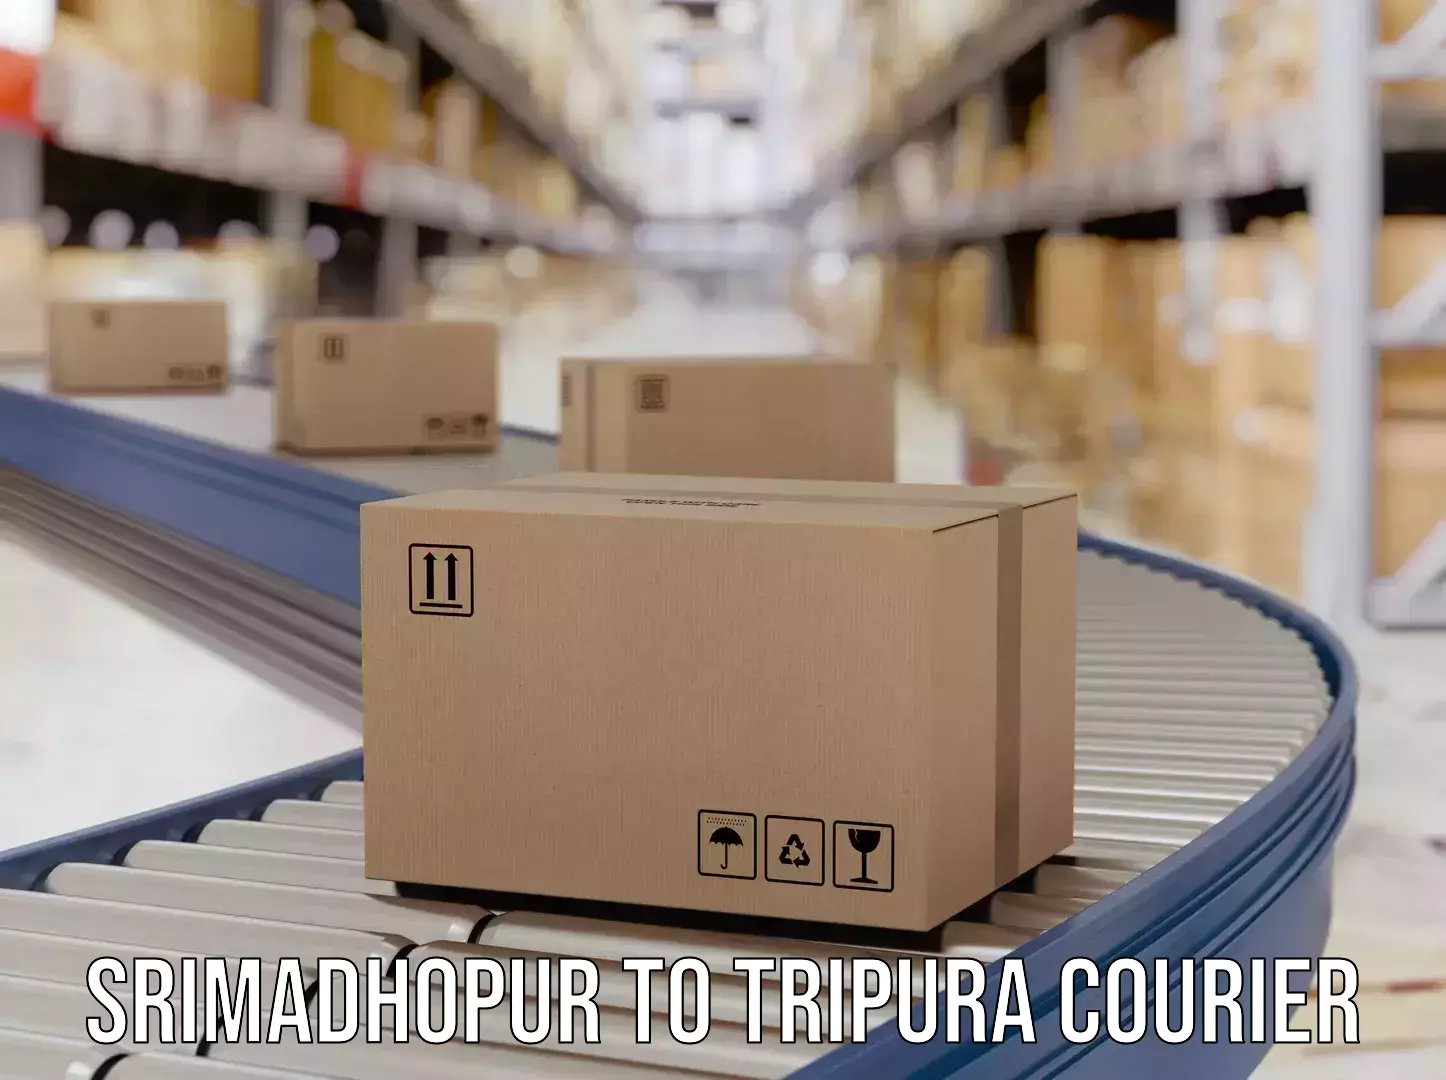 Subscription-based courier Srimadhopur to Bishalgarh